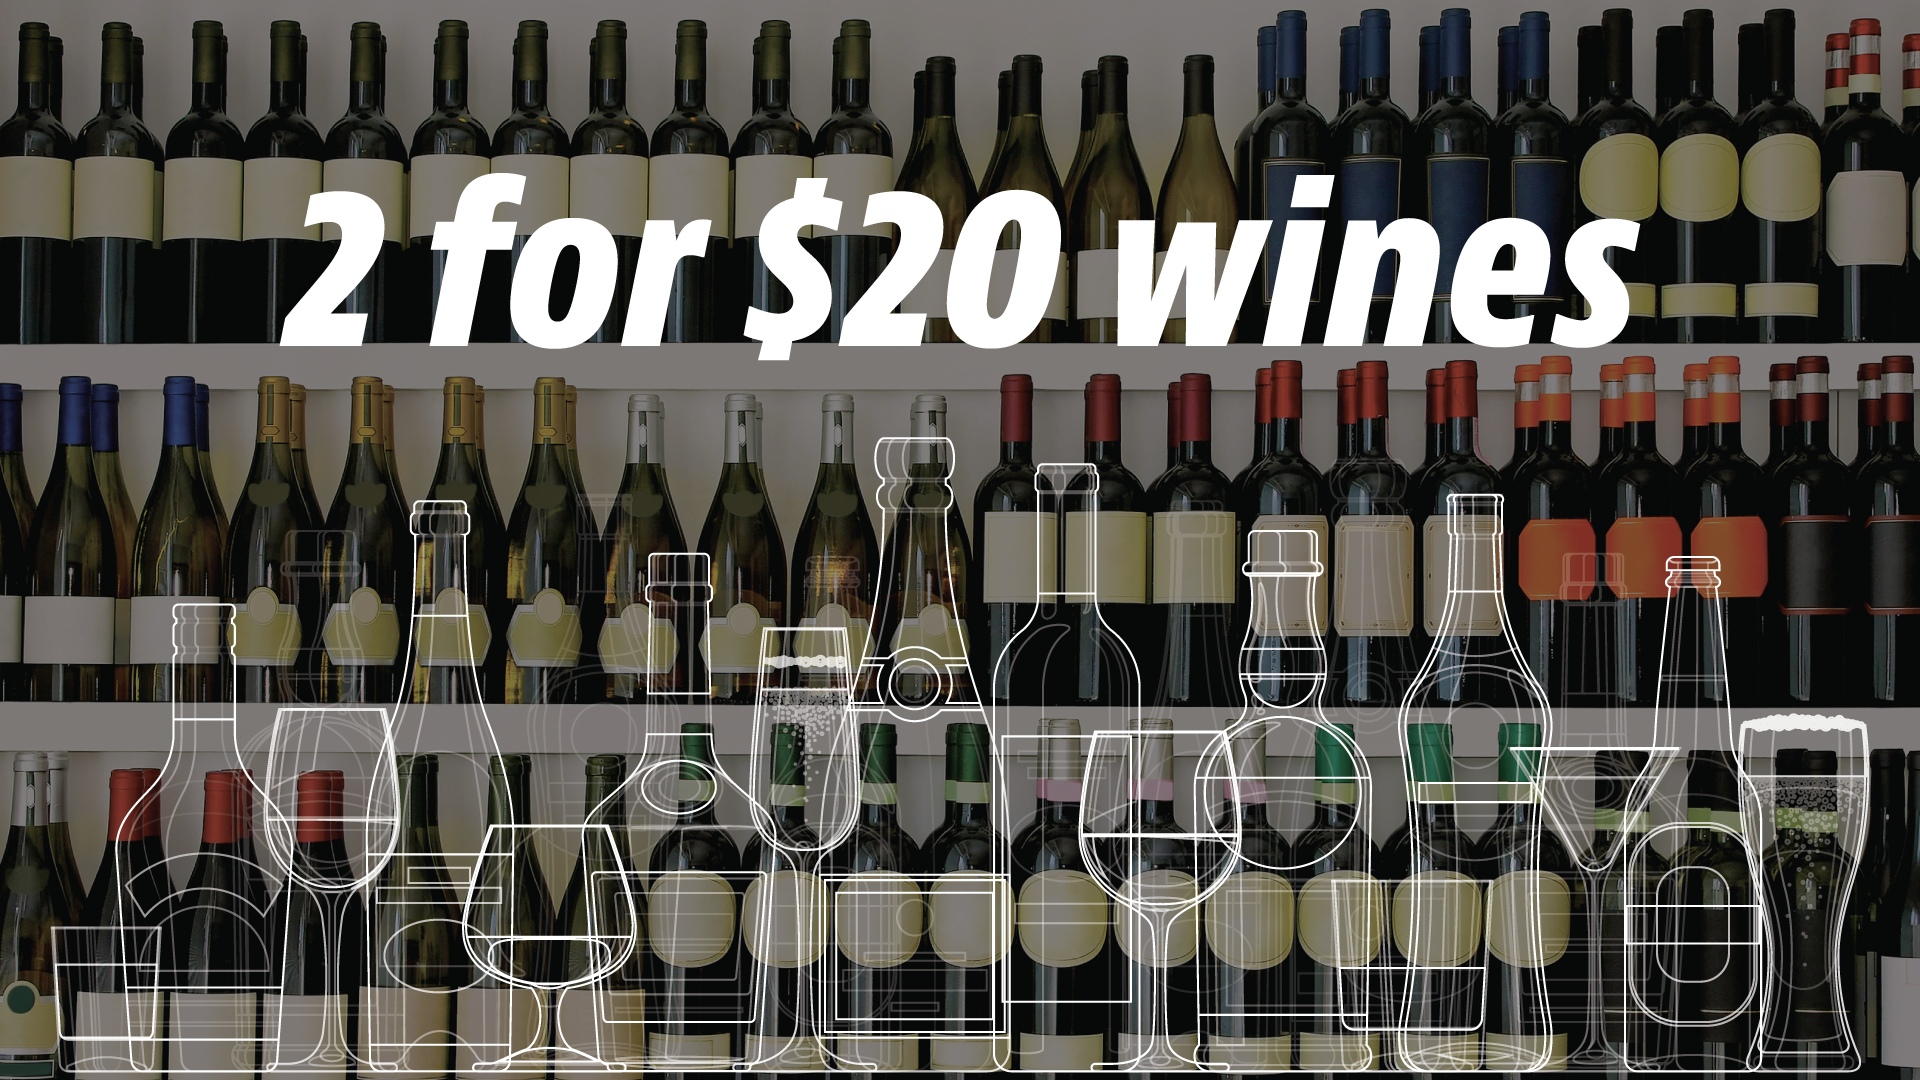 2 for $20 Wines